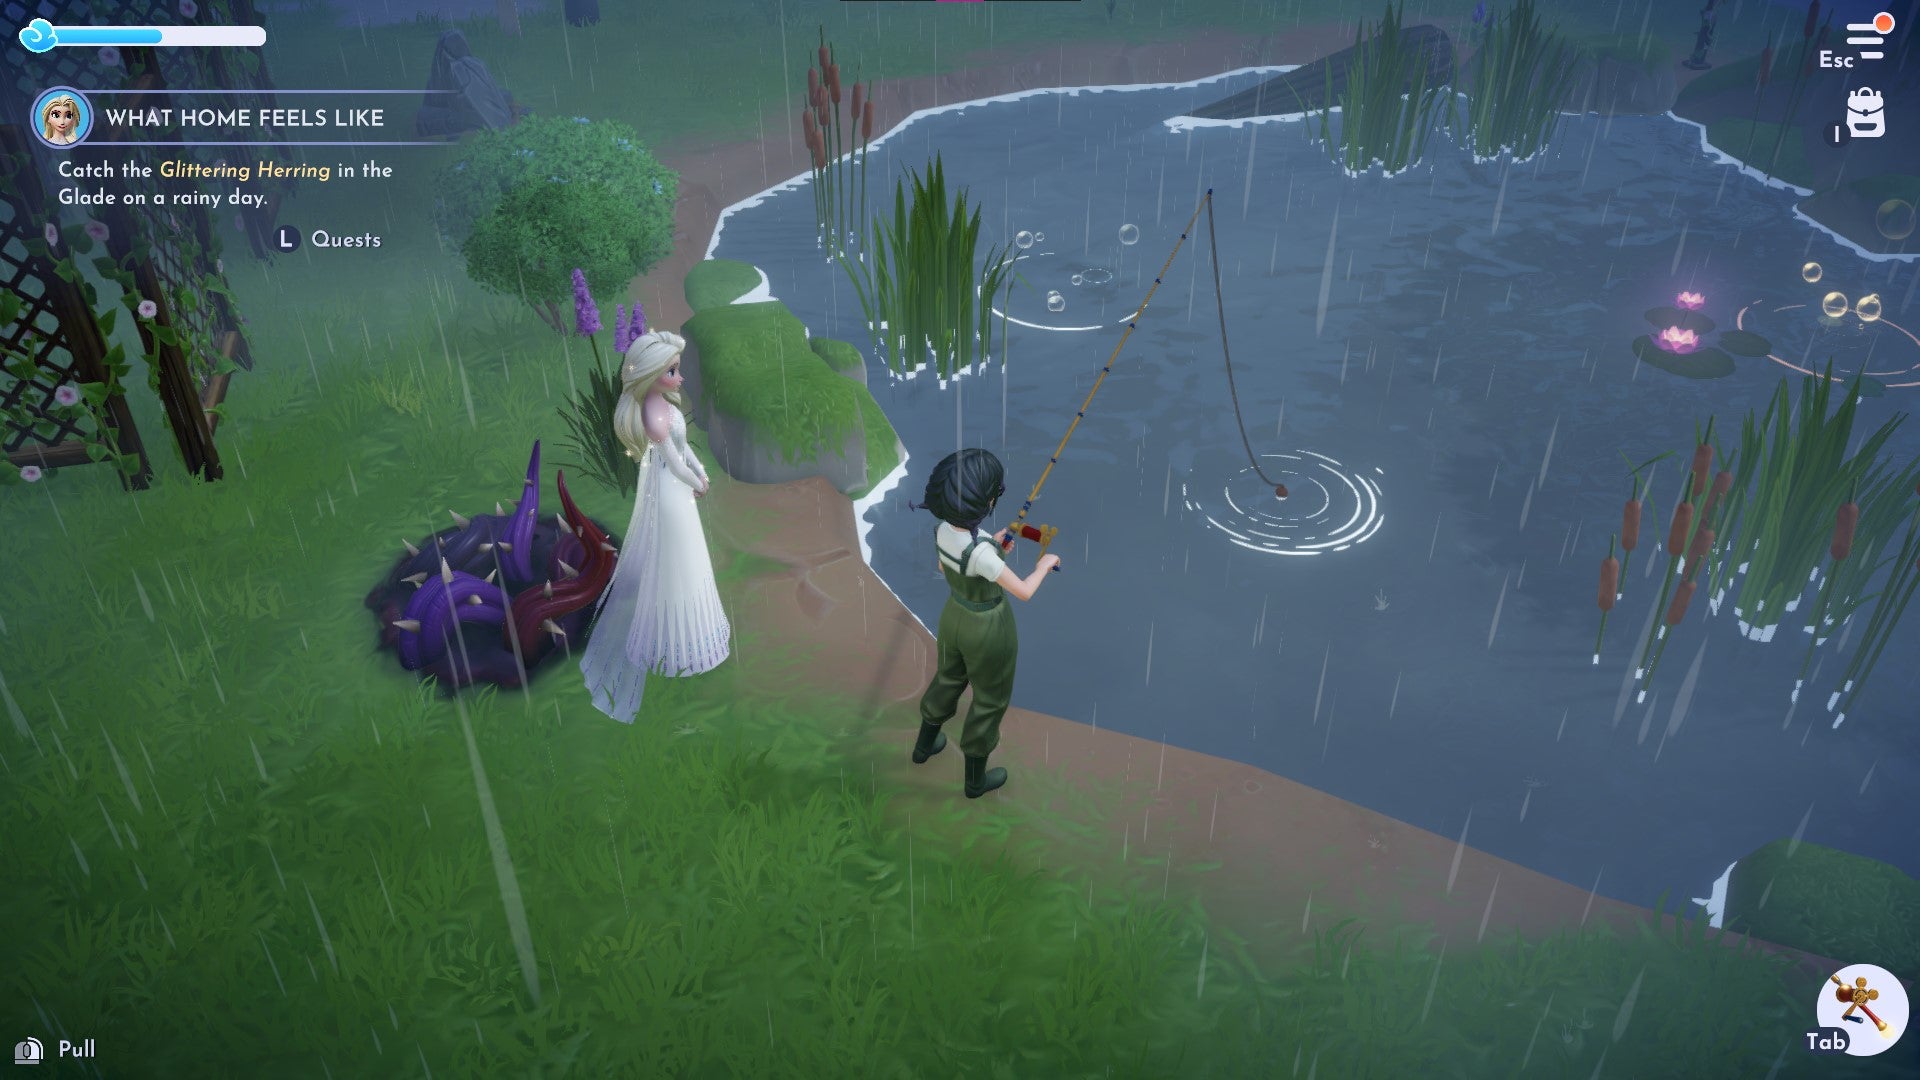 A player fishes alongside Elsa on a rainy day at Disney's Dreamlight Valley